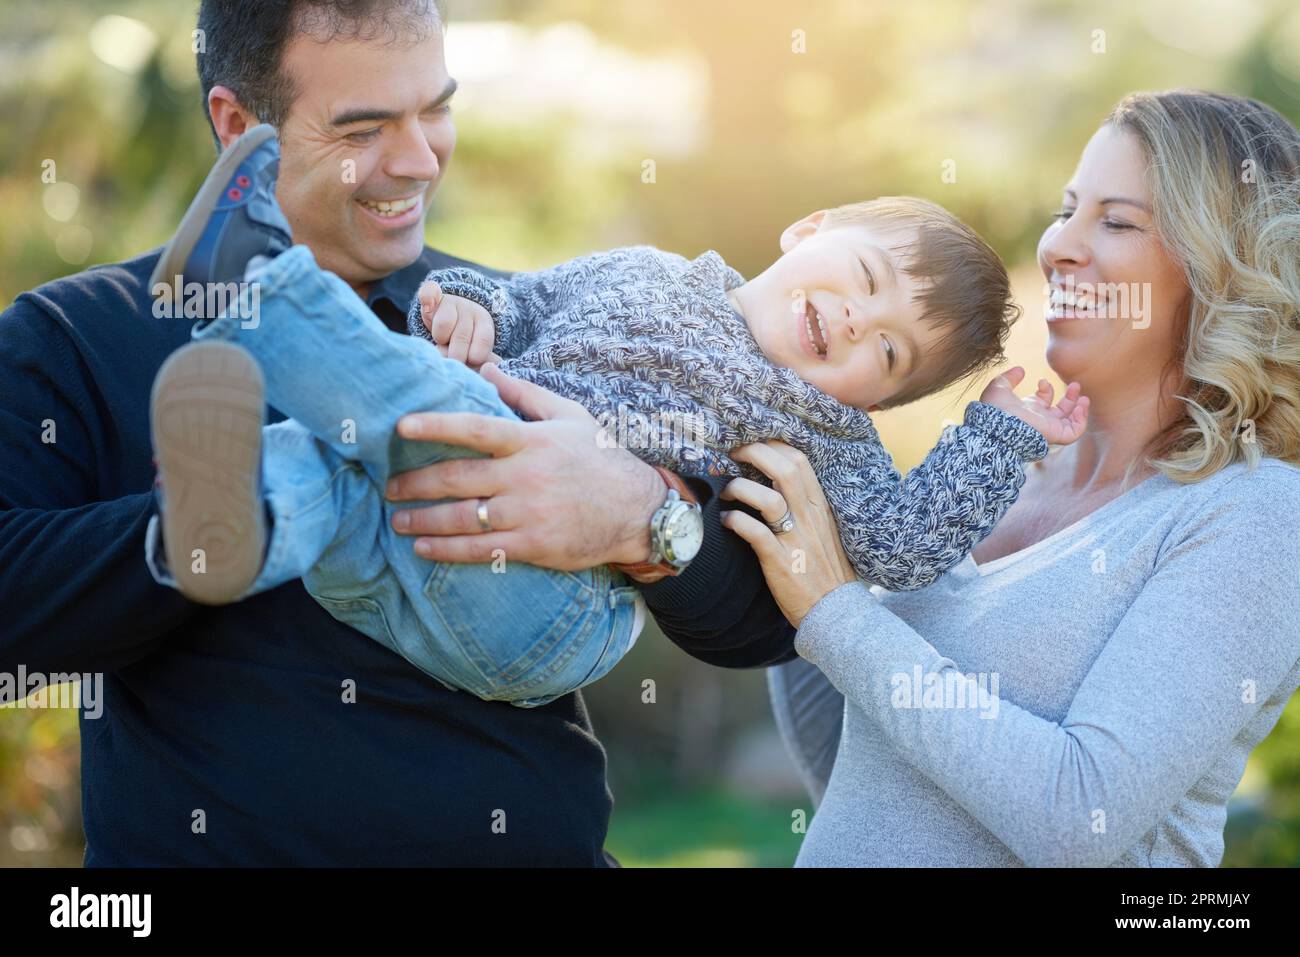 His laugh is just the cutest. parents bonding with their little boy outside. Stock Photo